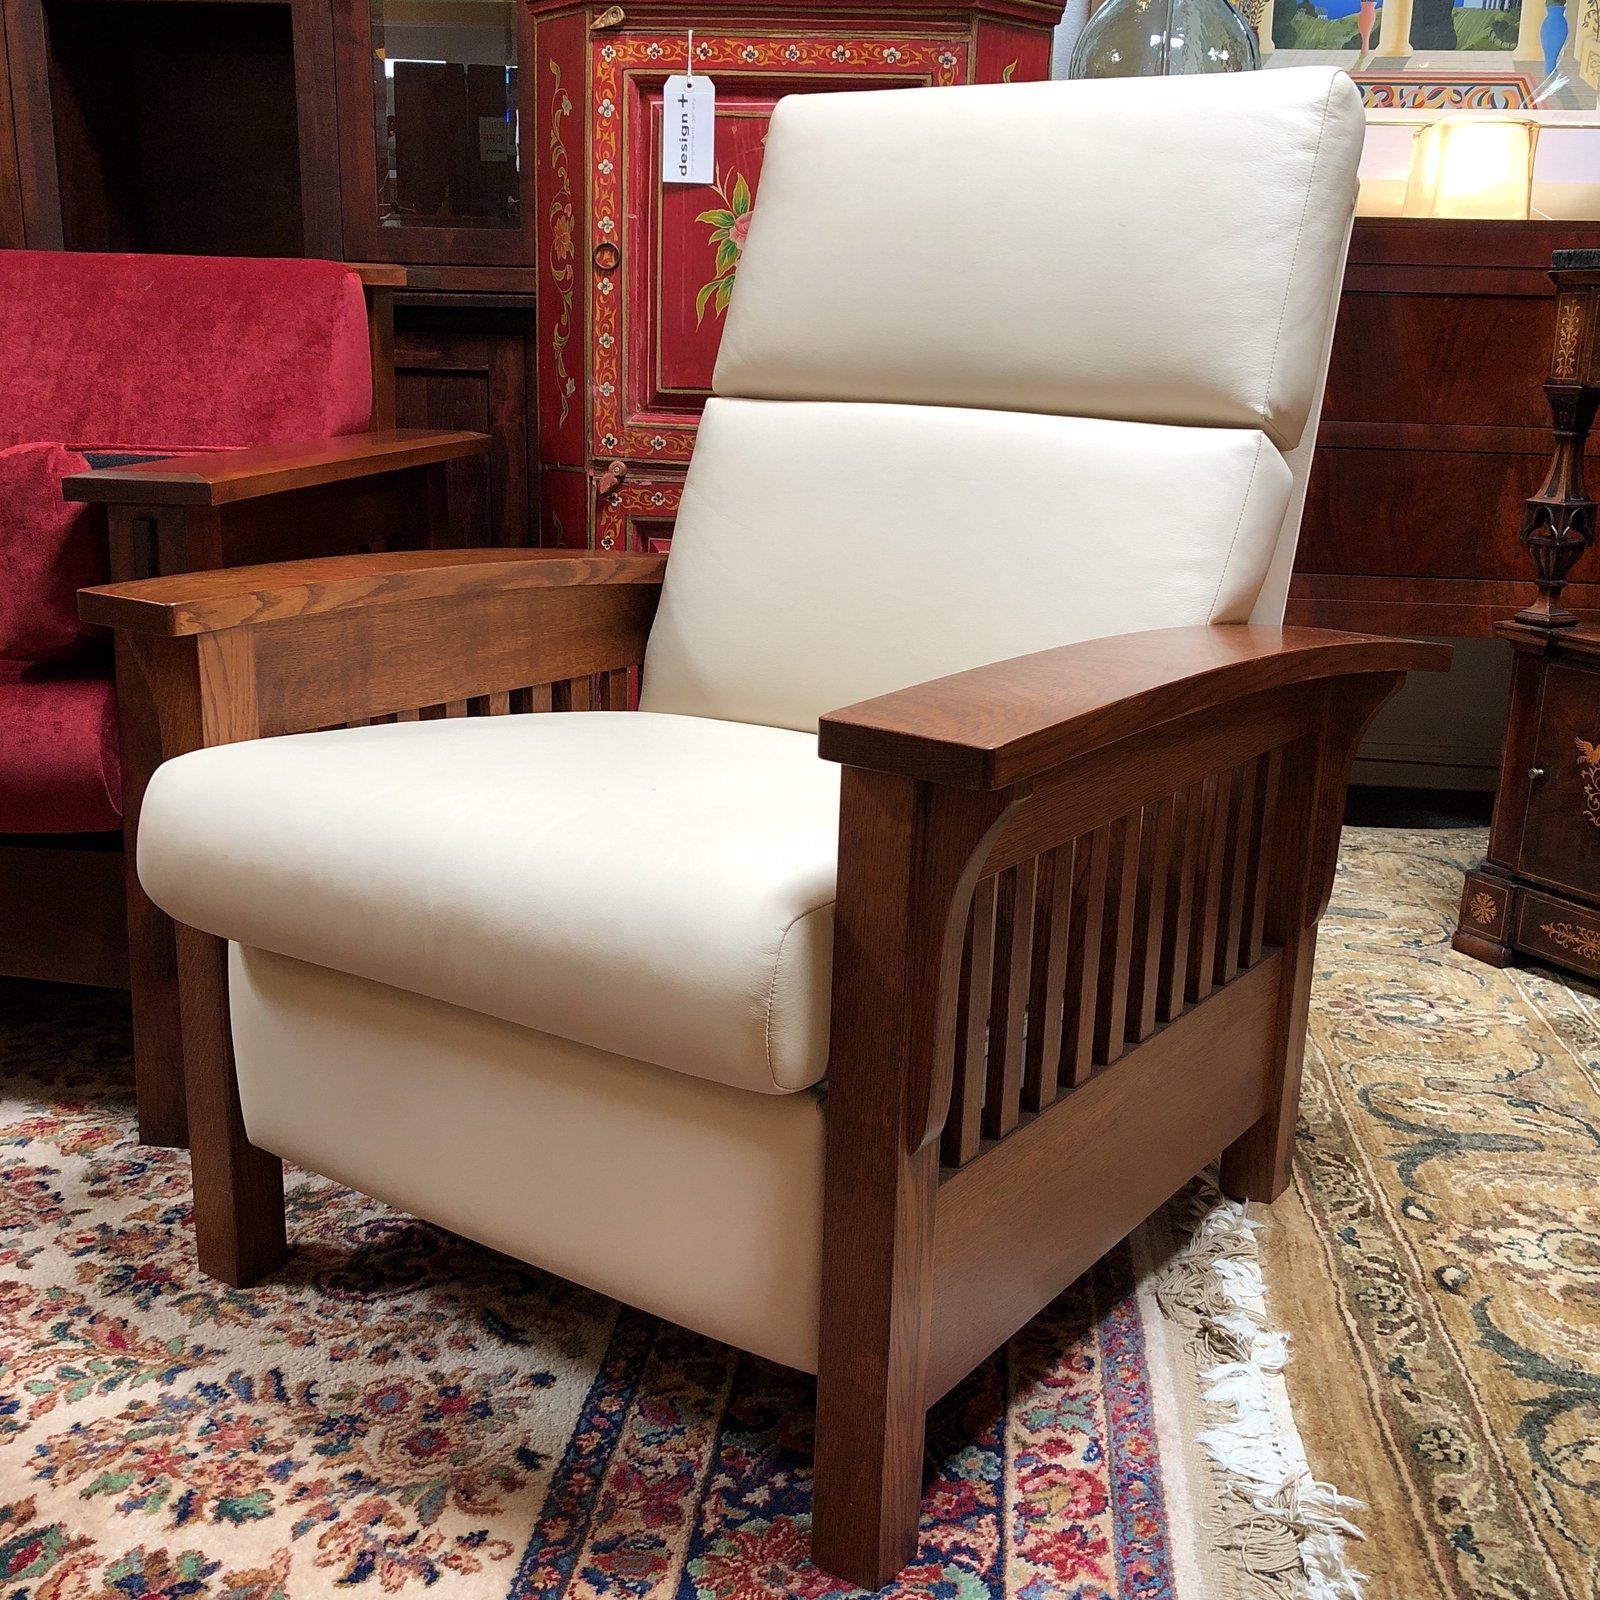 A skyline recliner by Aj' s Furniture. Straight from a designer showroom. Aj's Furniture was founded by Alvin Jr. and his wife Inez in 2000. Today, family oriented business has grown to encompass a full line of the home furnishings. The frame is a